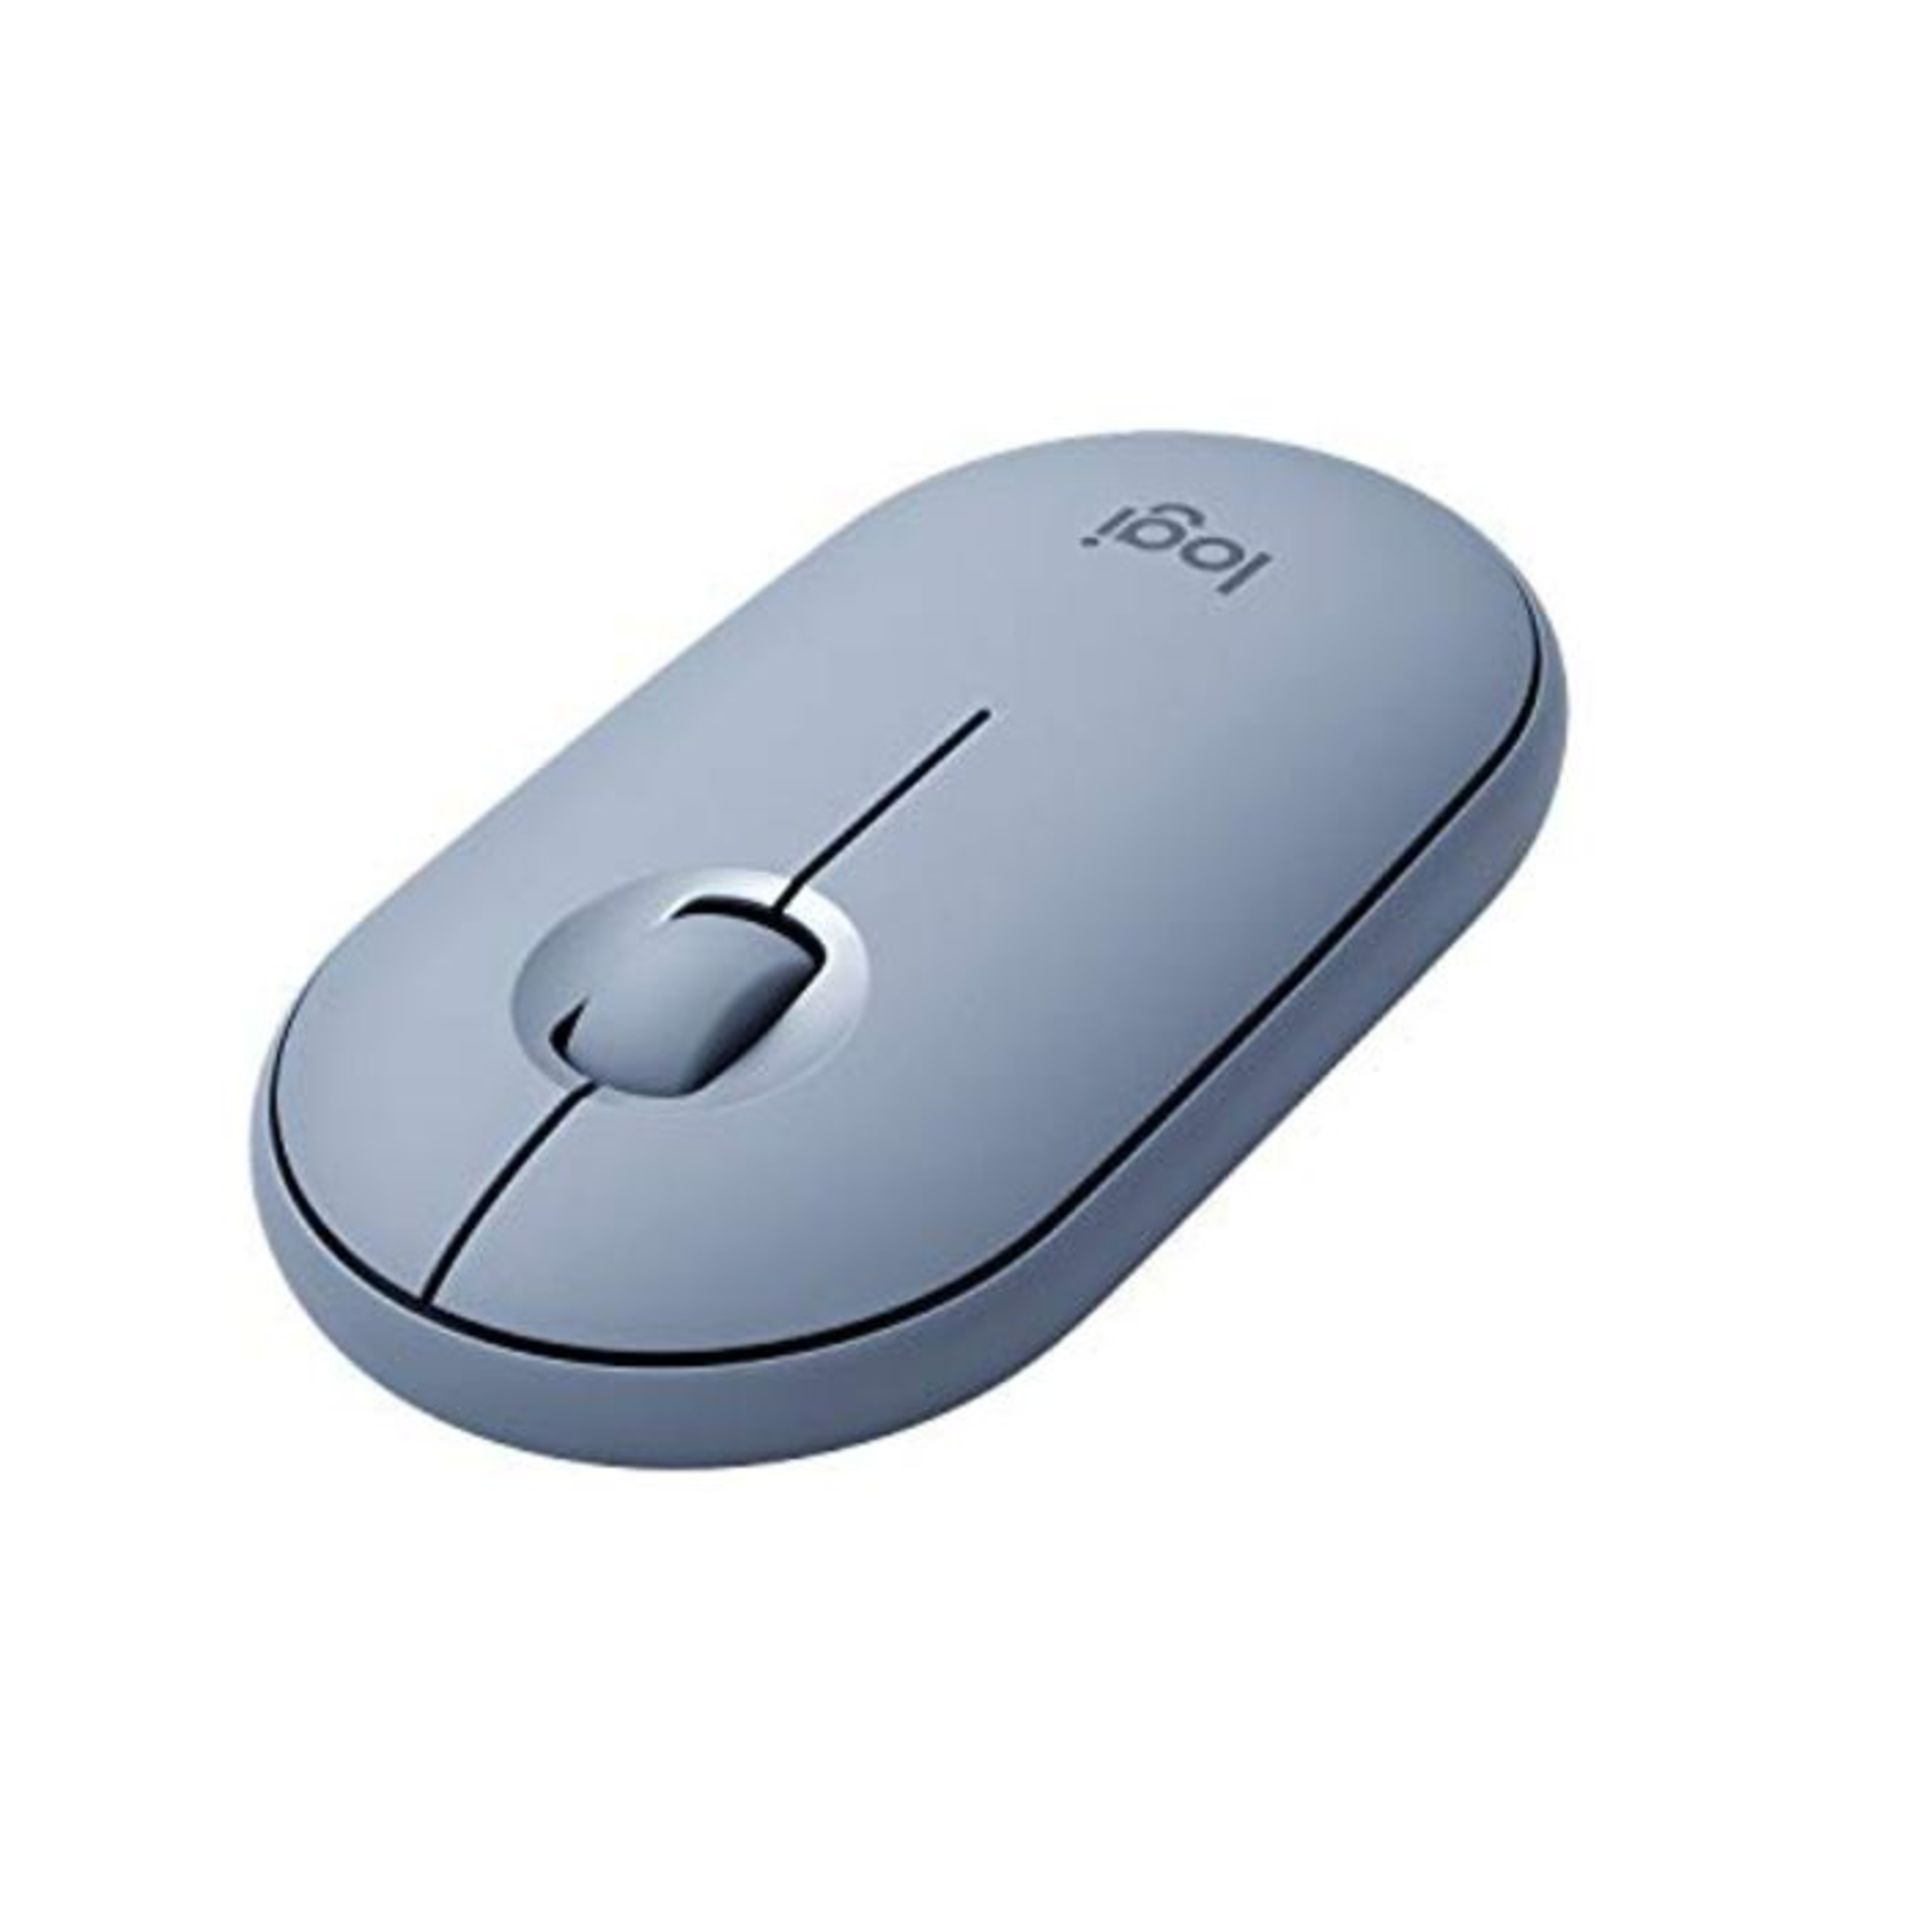 Logitech Pebble Wireless Mouse, Bluetooth Or 2.4 GHz with USB Mini-Receiver, Silent, S